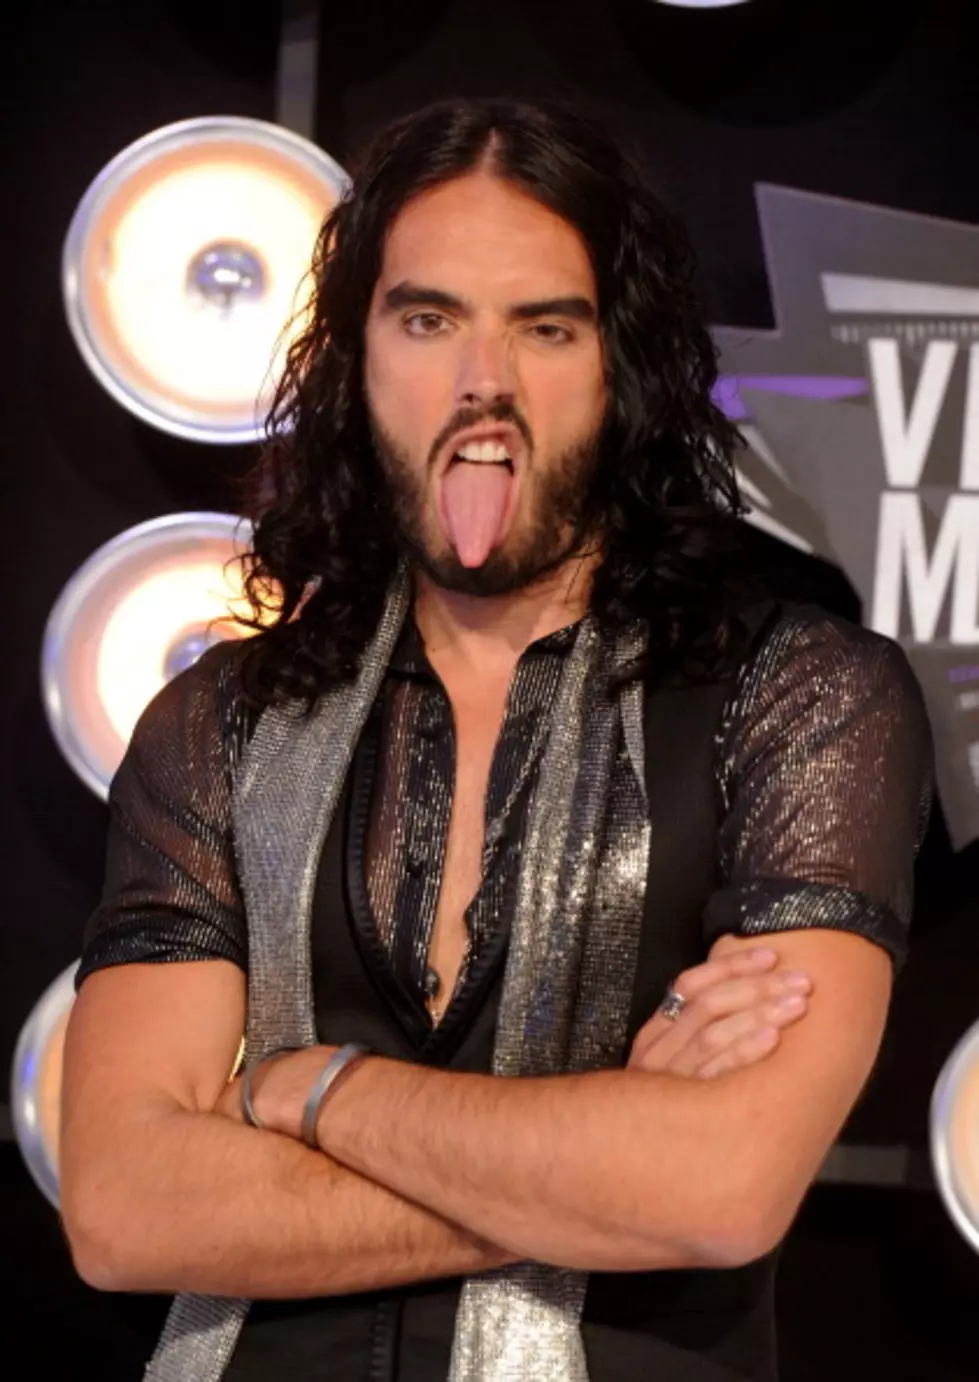 Hollywood Dirt: Russell Brand wanted for questioning + ‘Bachelor’ Ben Makes His Choice But Are They Still Together?